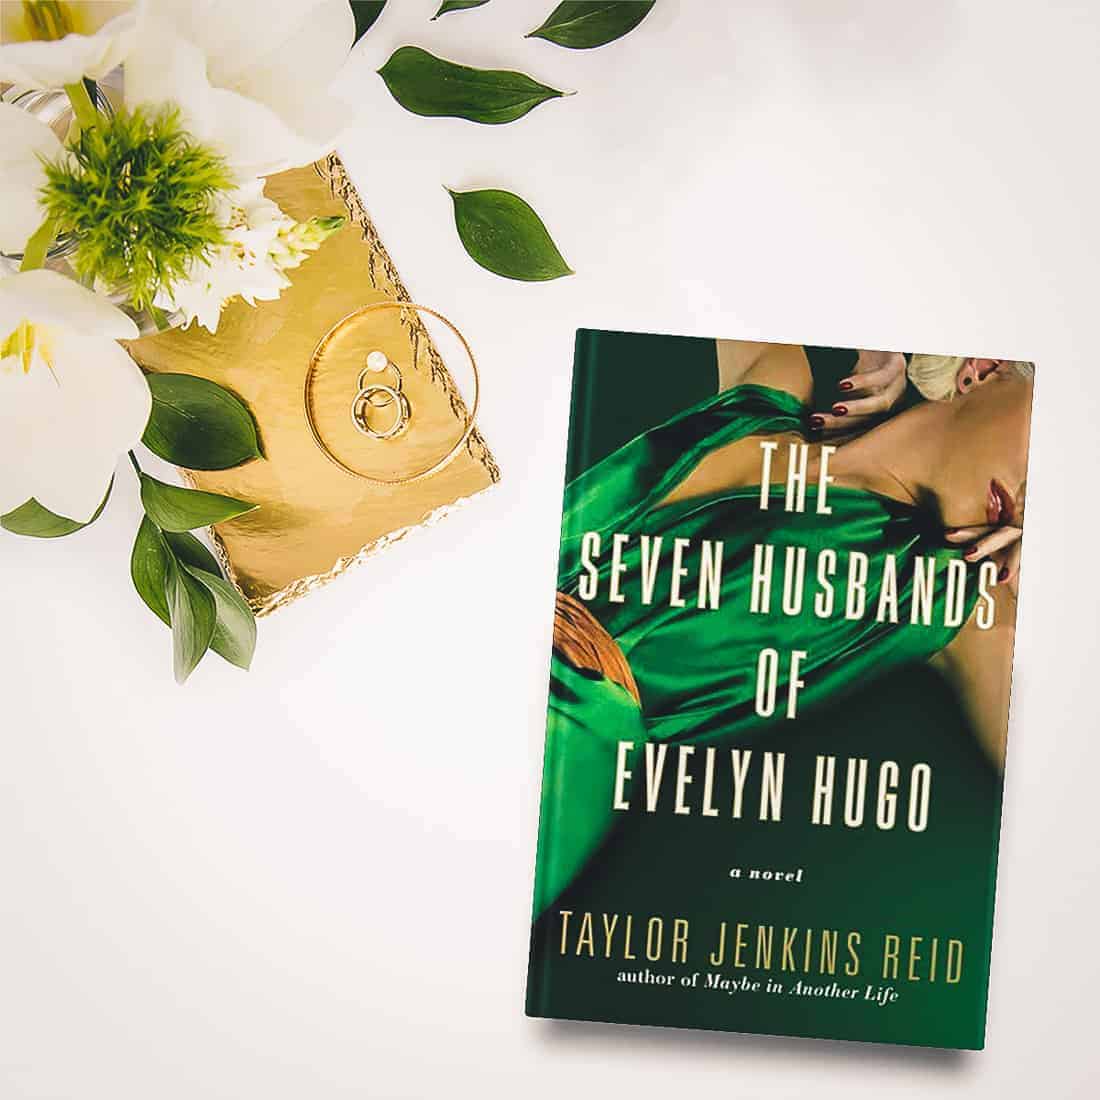 The Seven Husbands of Evelyn Hugo by Taylor Jenkins Reid is a powerful, heartbreaking, and emotional work of fiction that reads like the scandalous biography of a real-life Hollywood actress